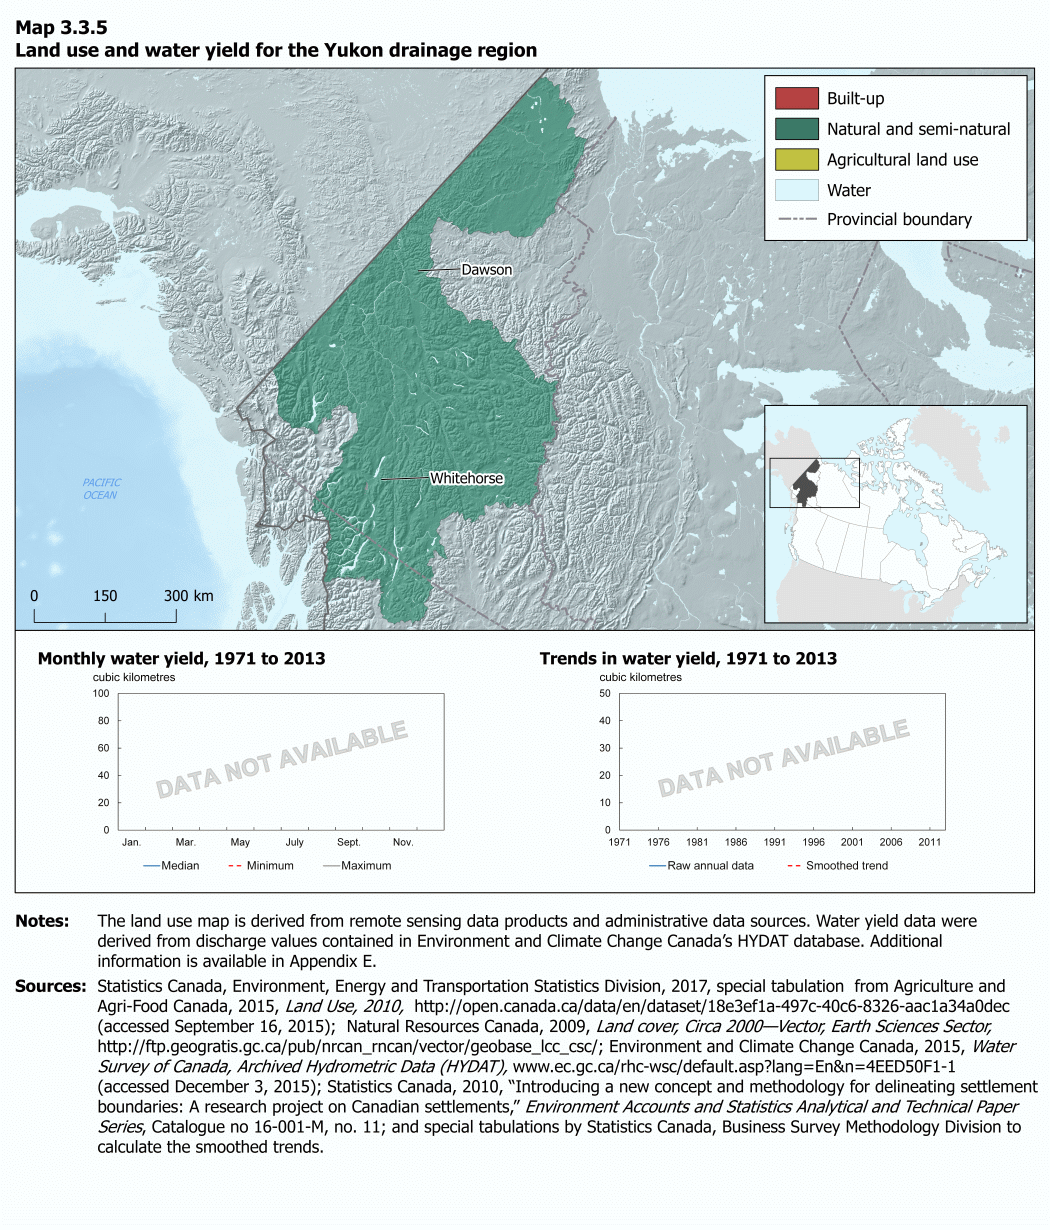 Map 3.3.5 Land use and water yield for the Yukon drainage region